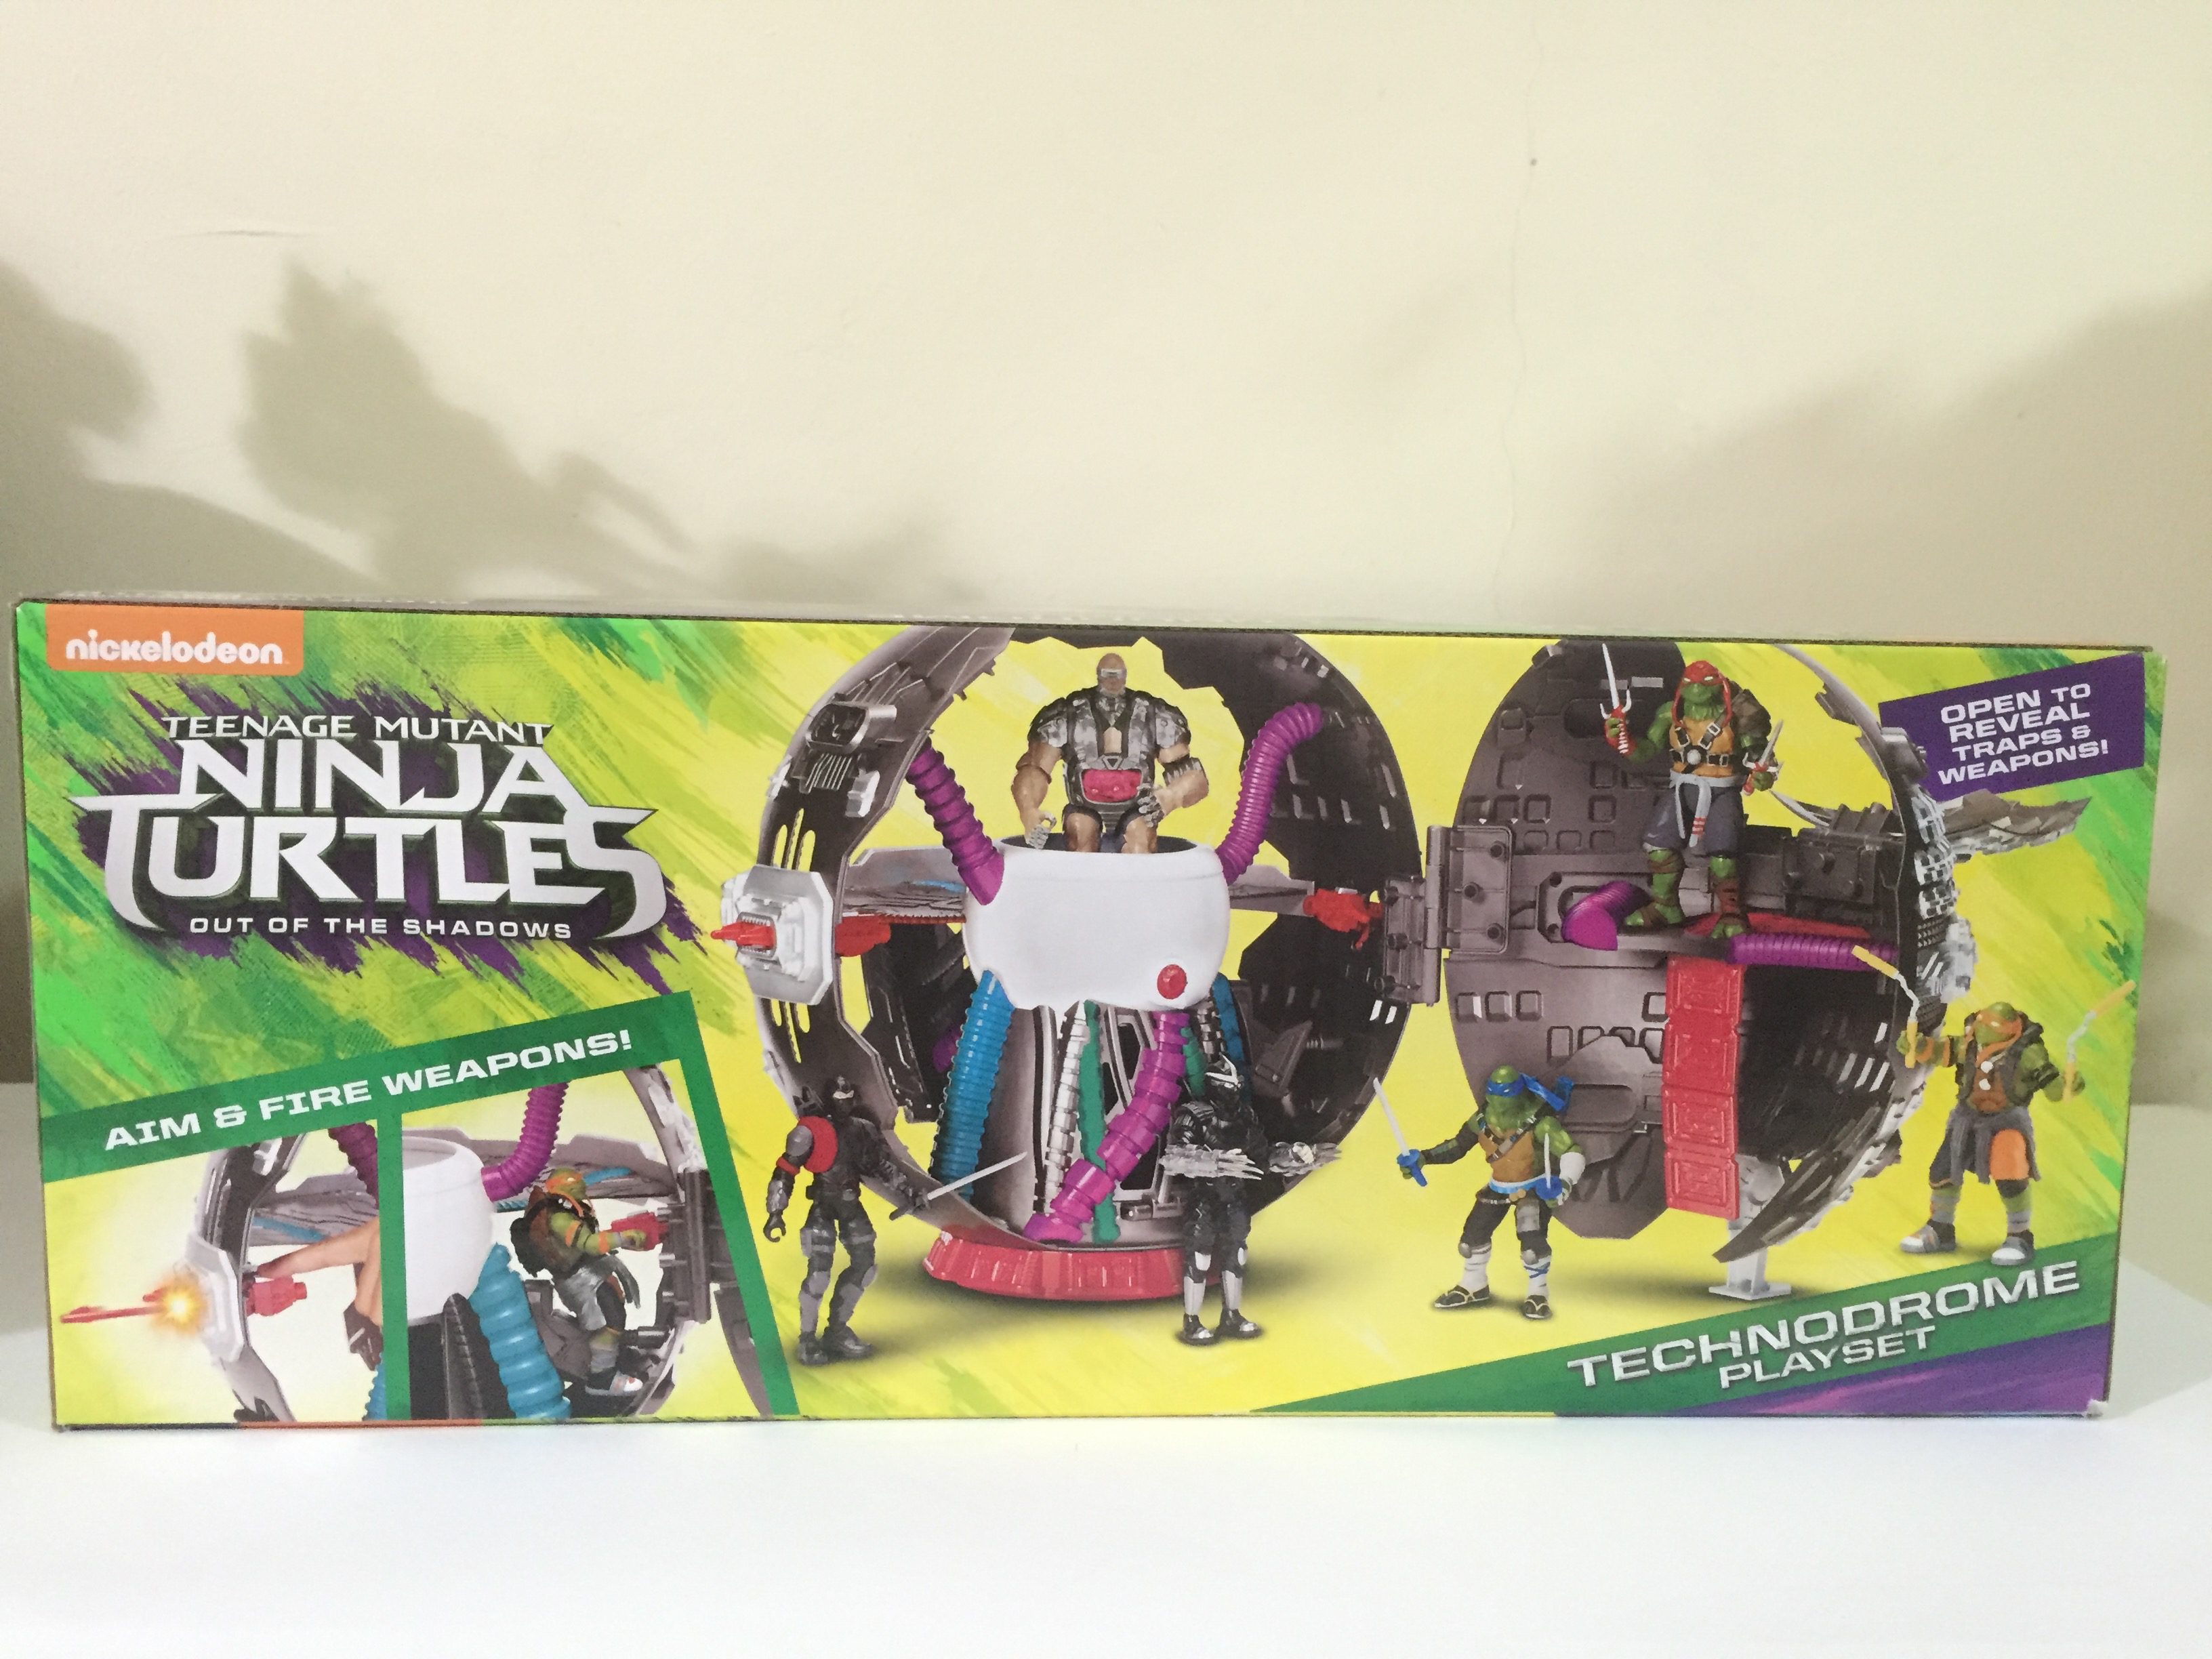 Packaging for the Technodrome.